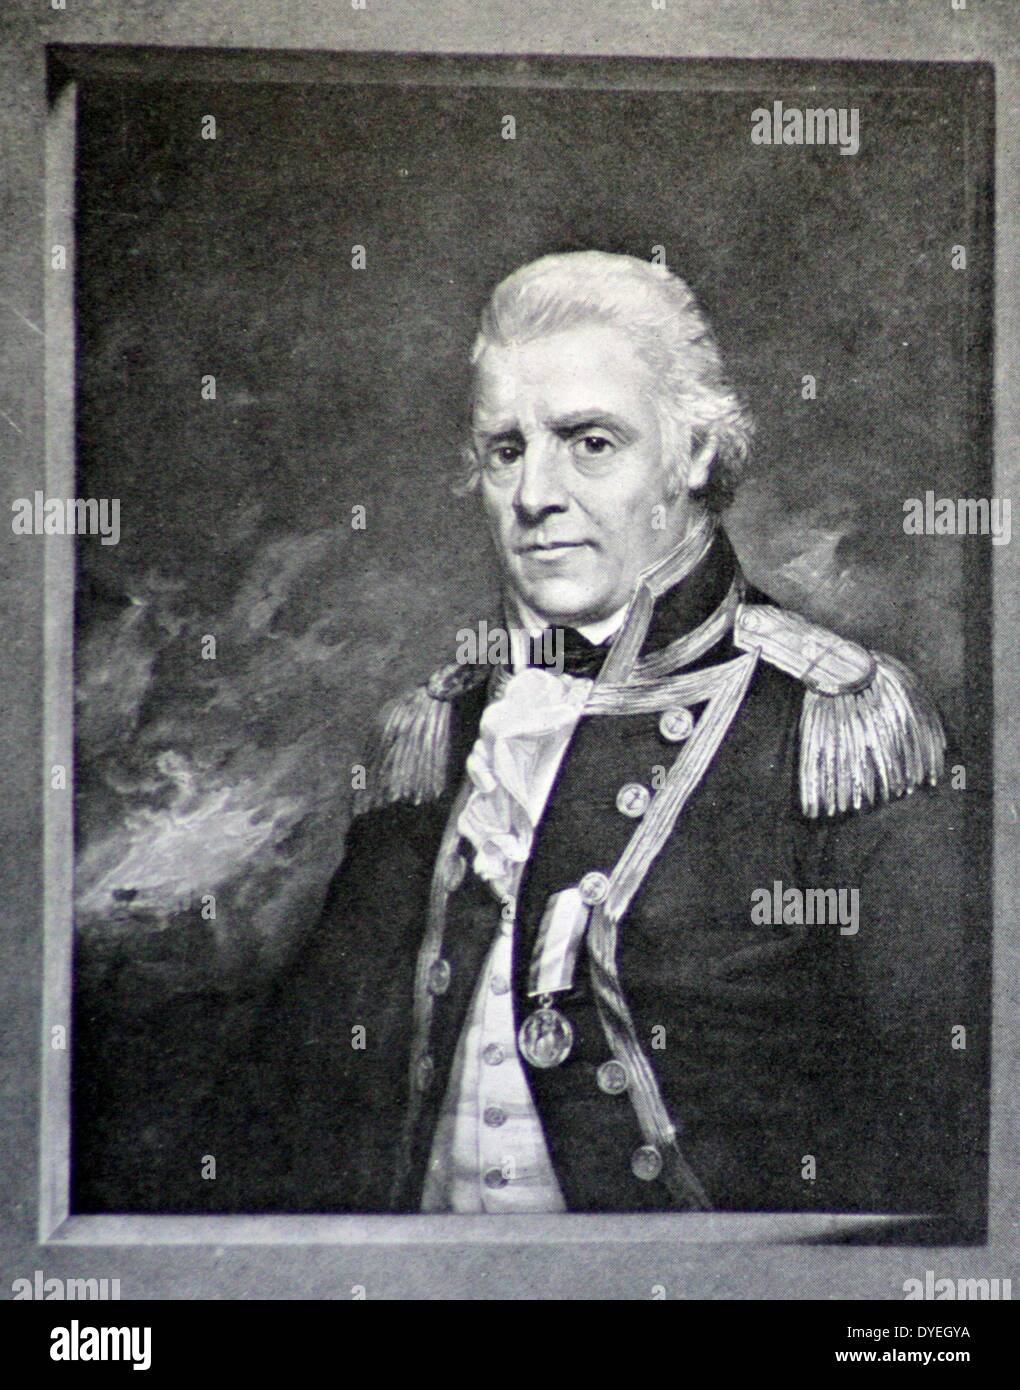 Sir Henry D'Esterre Darby (1750-1823) was an officer in the Royal Navy. He had command of HMS Bellerophon at the Battle of the Nile in 1798. Stock Photo